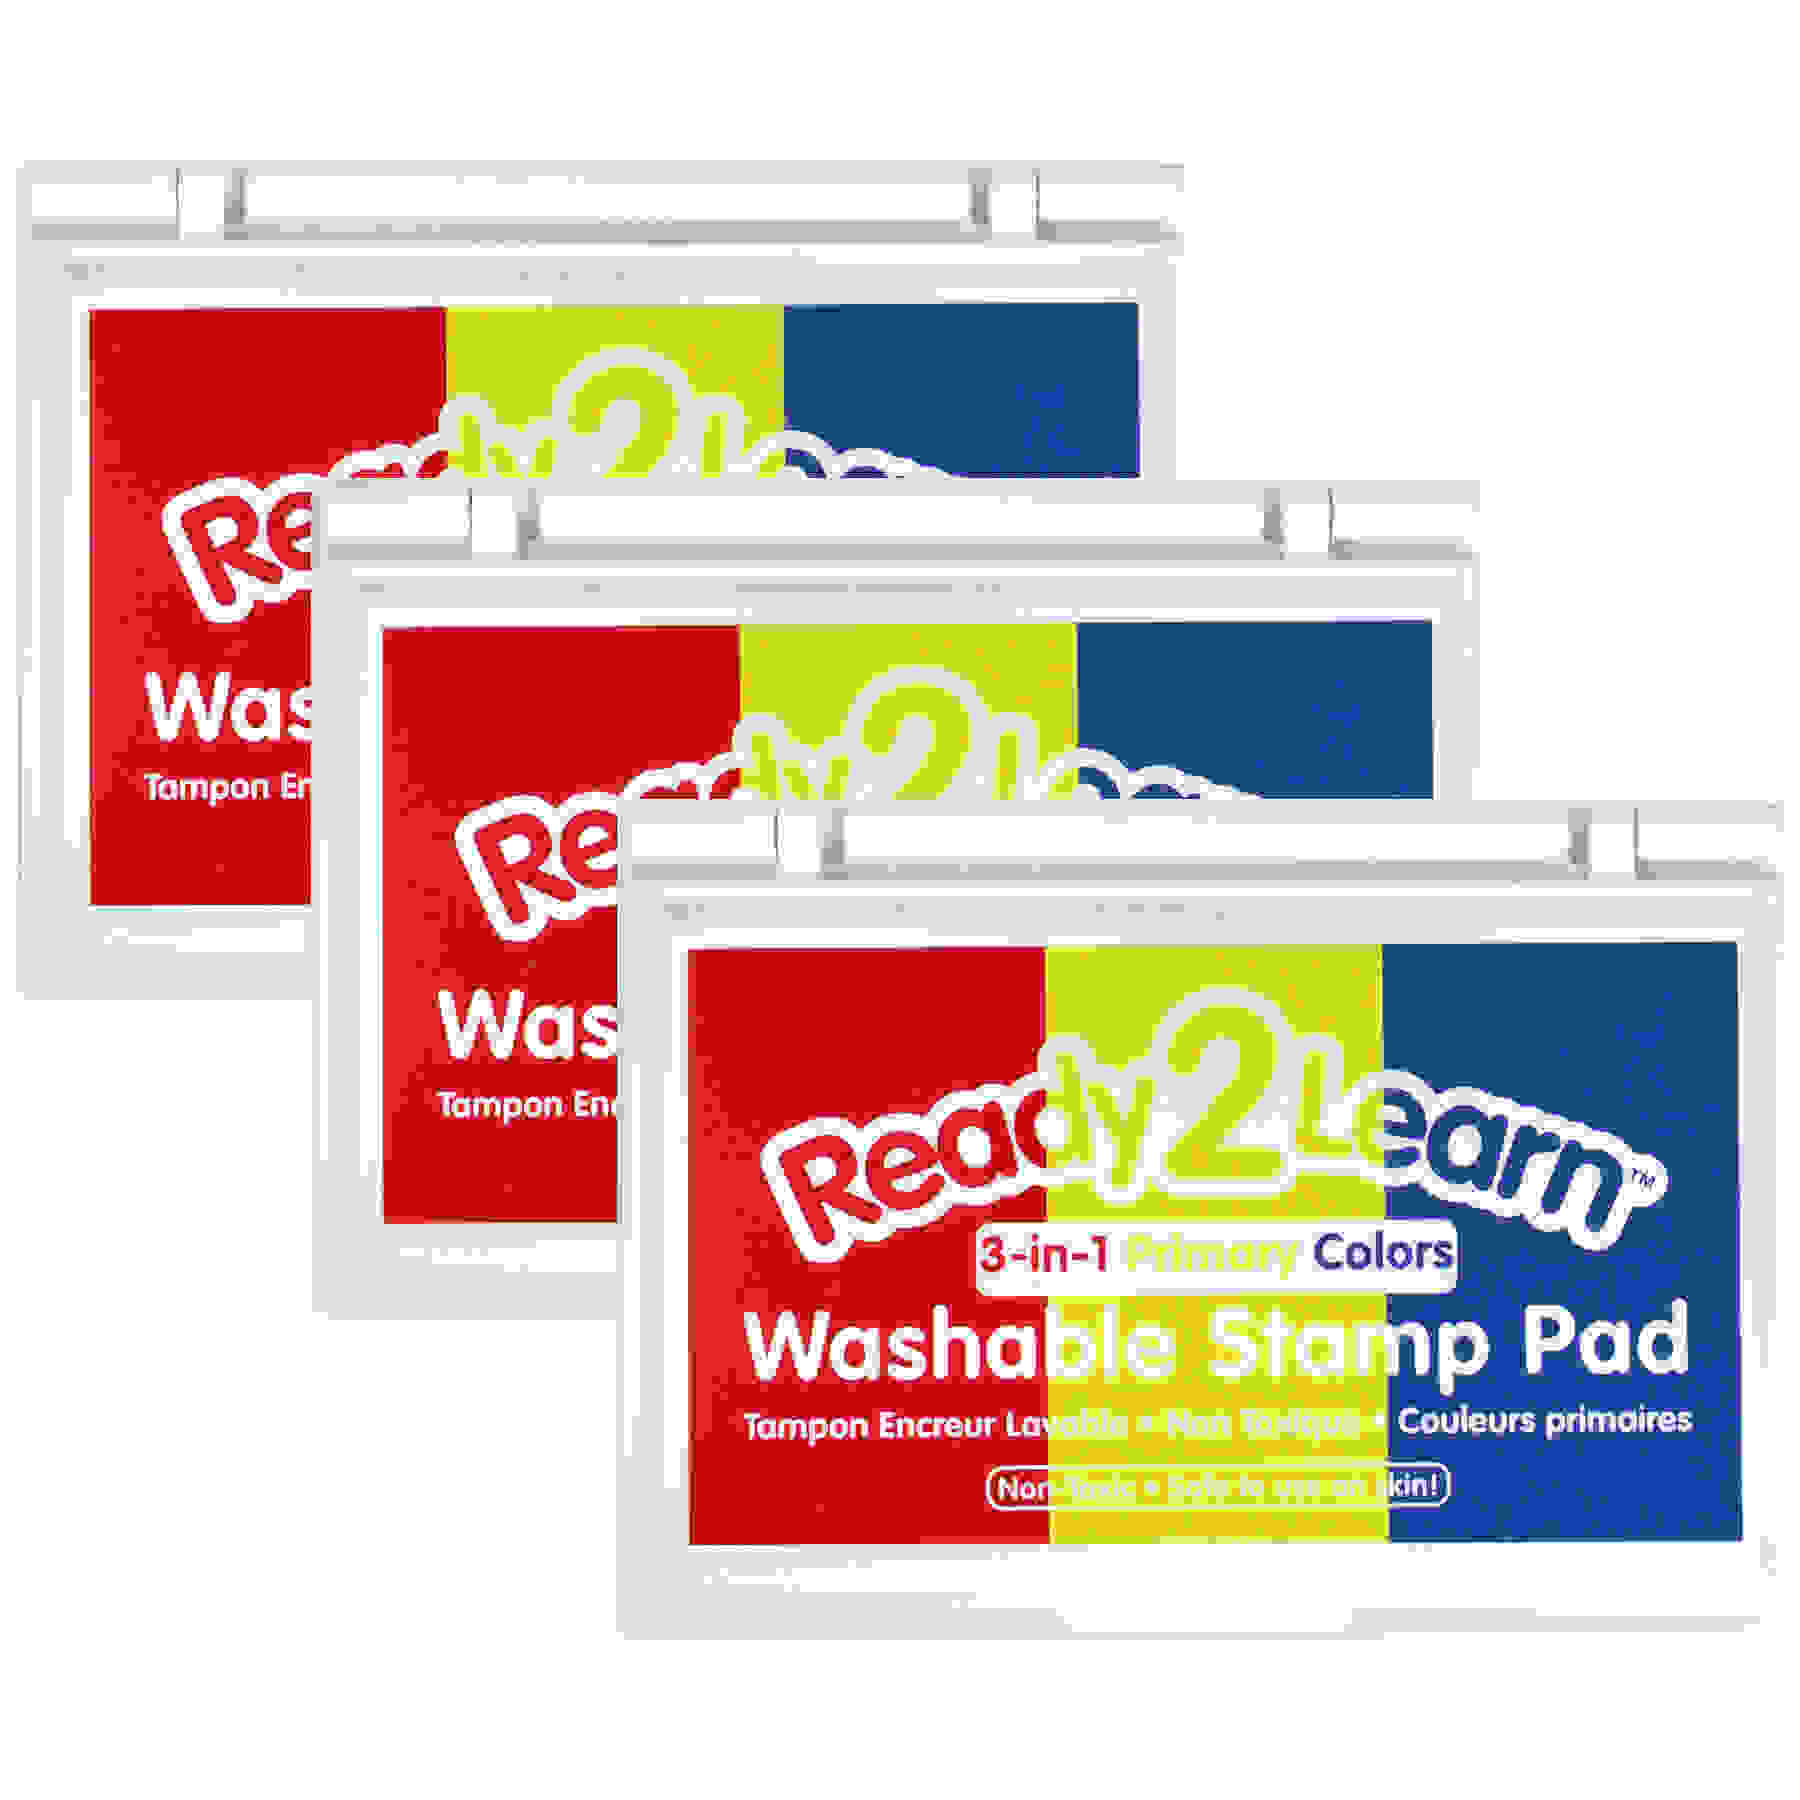 Washable Stamp Pad - 3-in-1 Primary Colors - Pack of 3